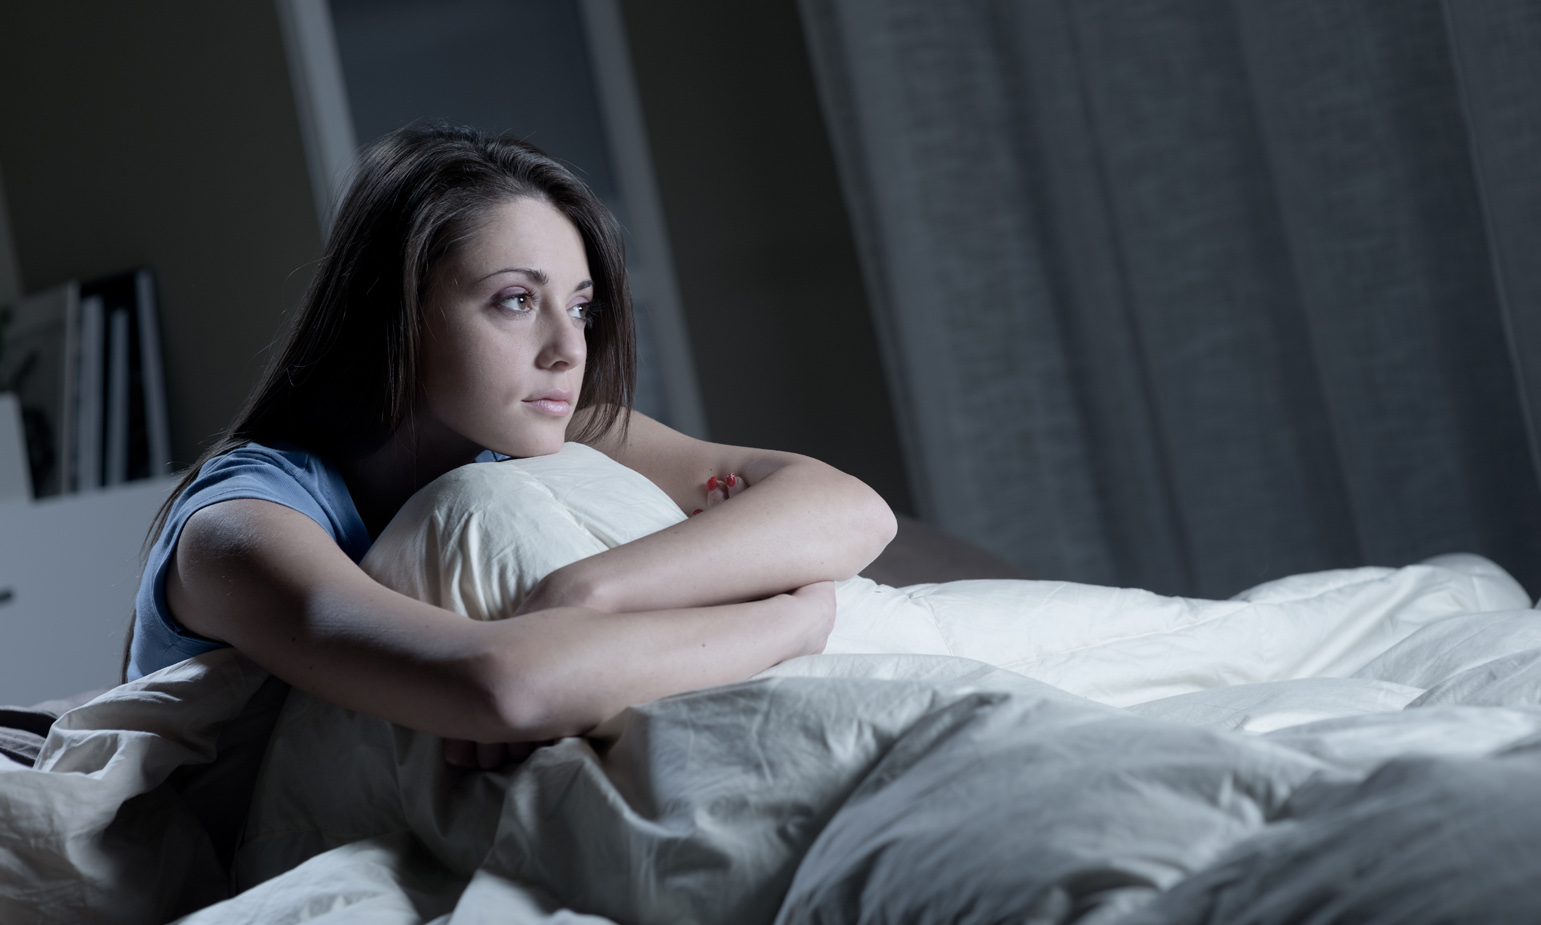 Woman, legs covered by comforter, sitting up in bed, clutching her knees, gazing out